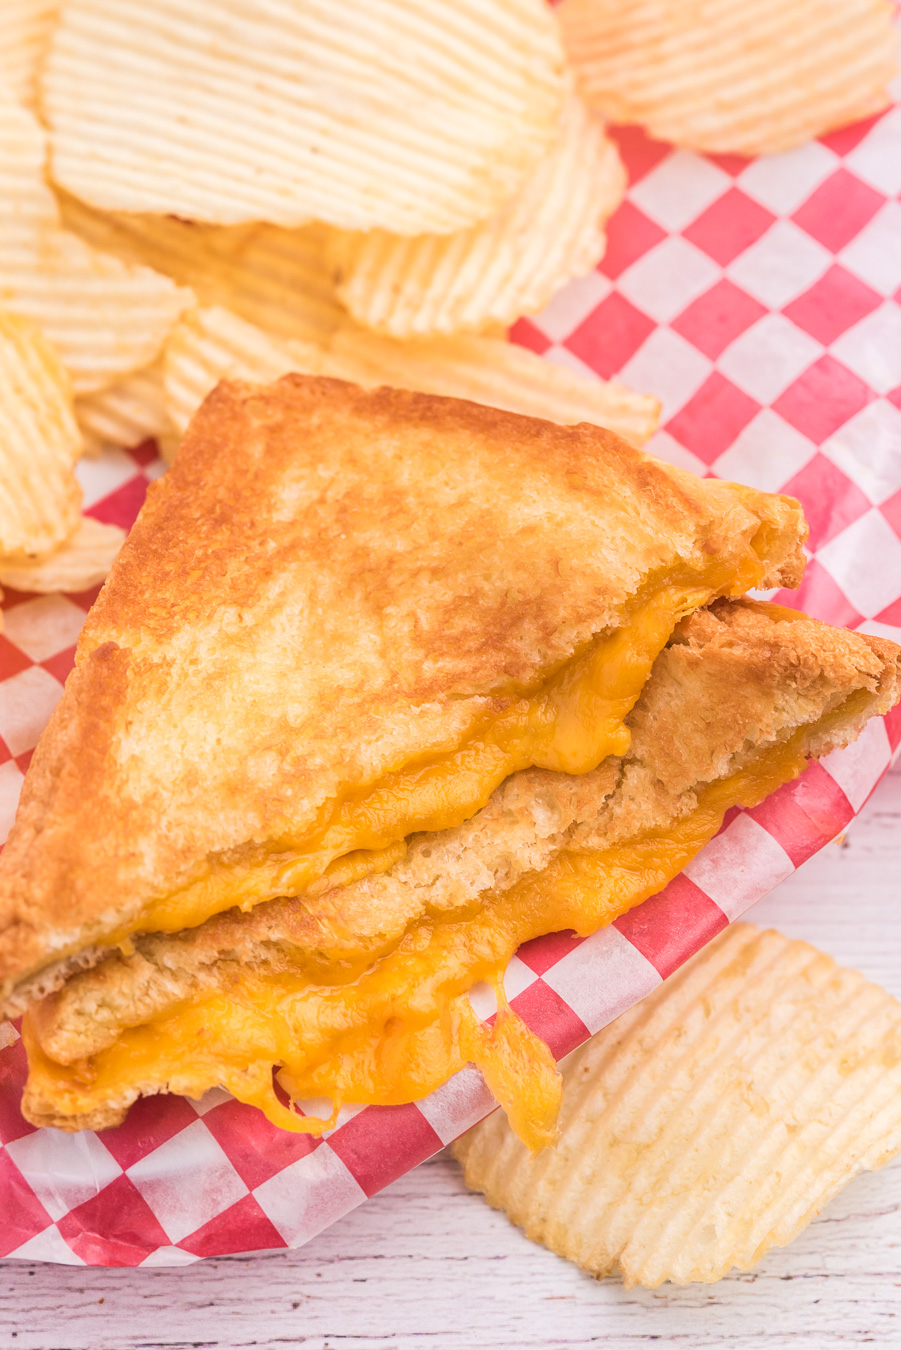 grilled cheese with extra cheese oozing out of it. Served on restaurant style checkered wax paper and ruffled chips